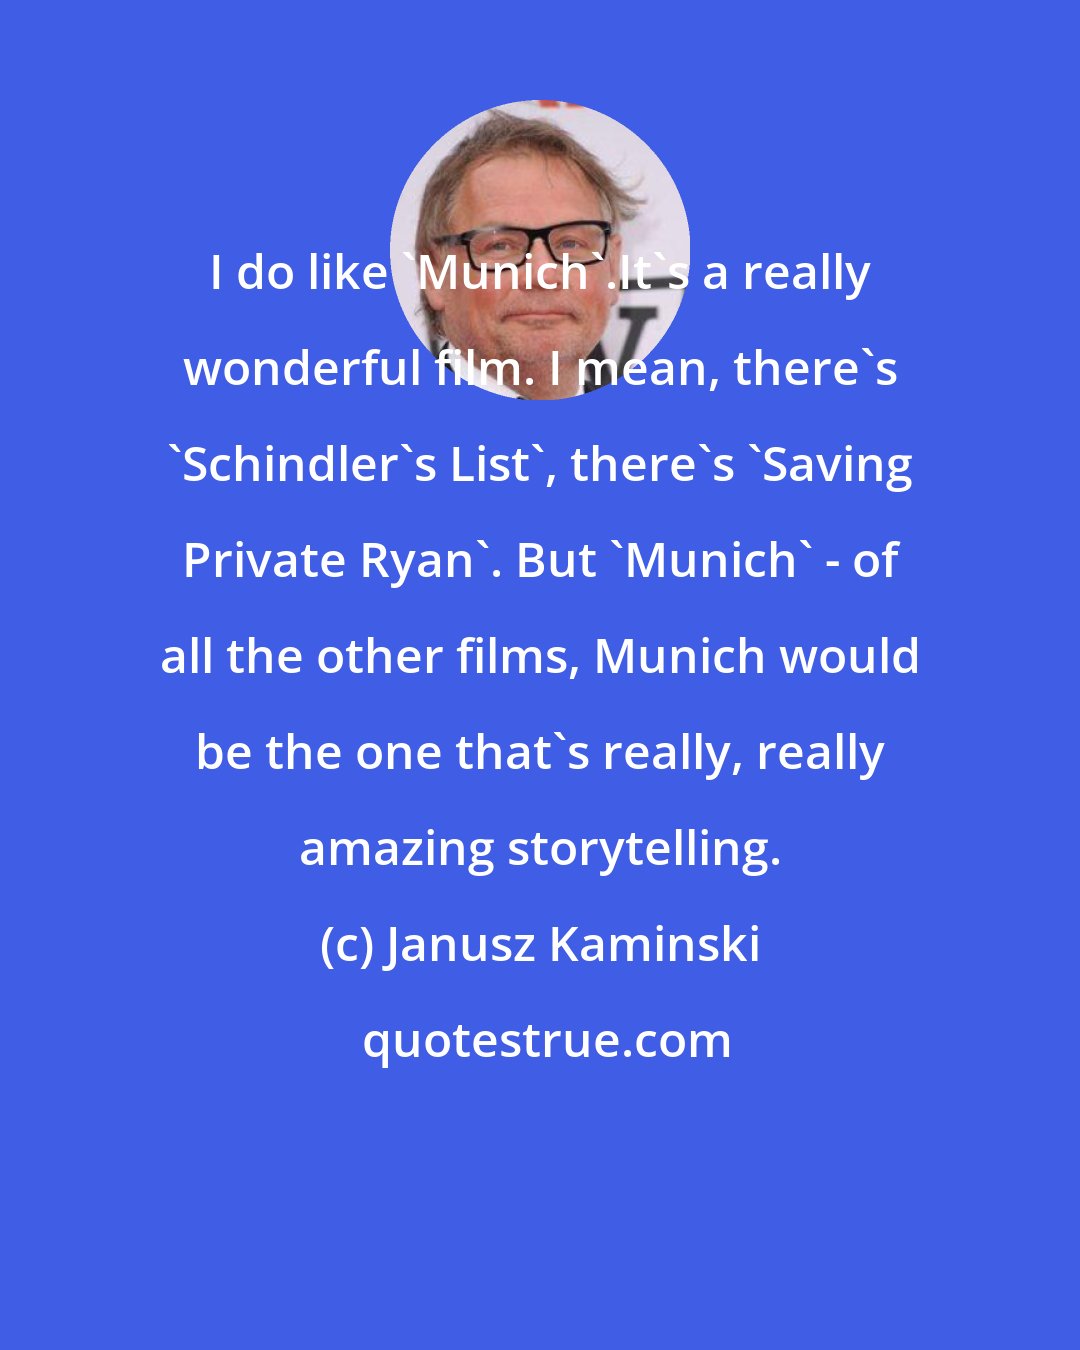 Janusz Kaminski: I do like 'Munich'.It's a really wonderful film. I mean, there's 'Schindler's List', there's 'Saving Private Ryan'. But 'Munich' - of all the other films, Munich would be the one that's really, really amazing storytelling.